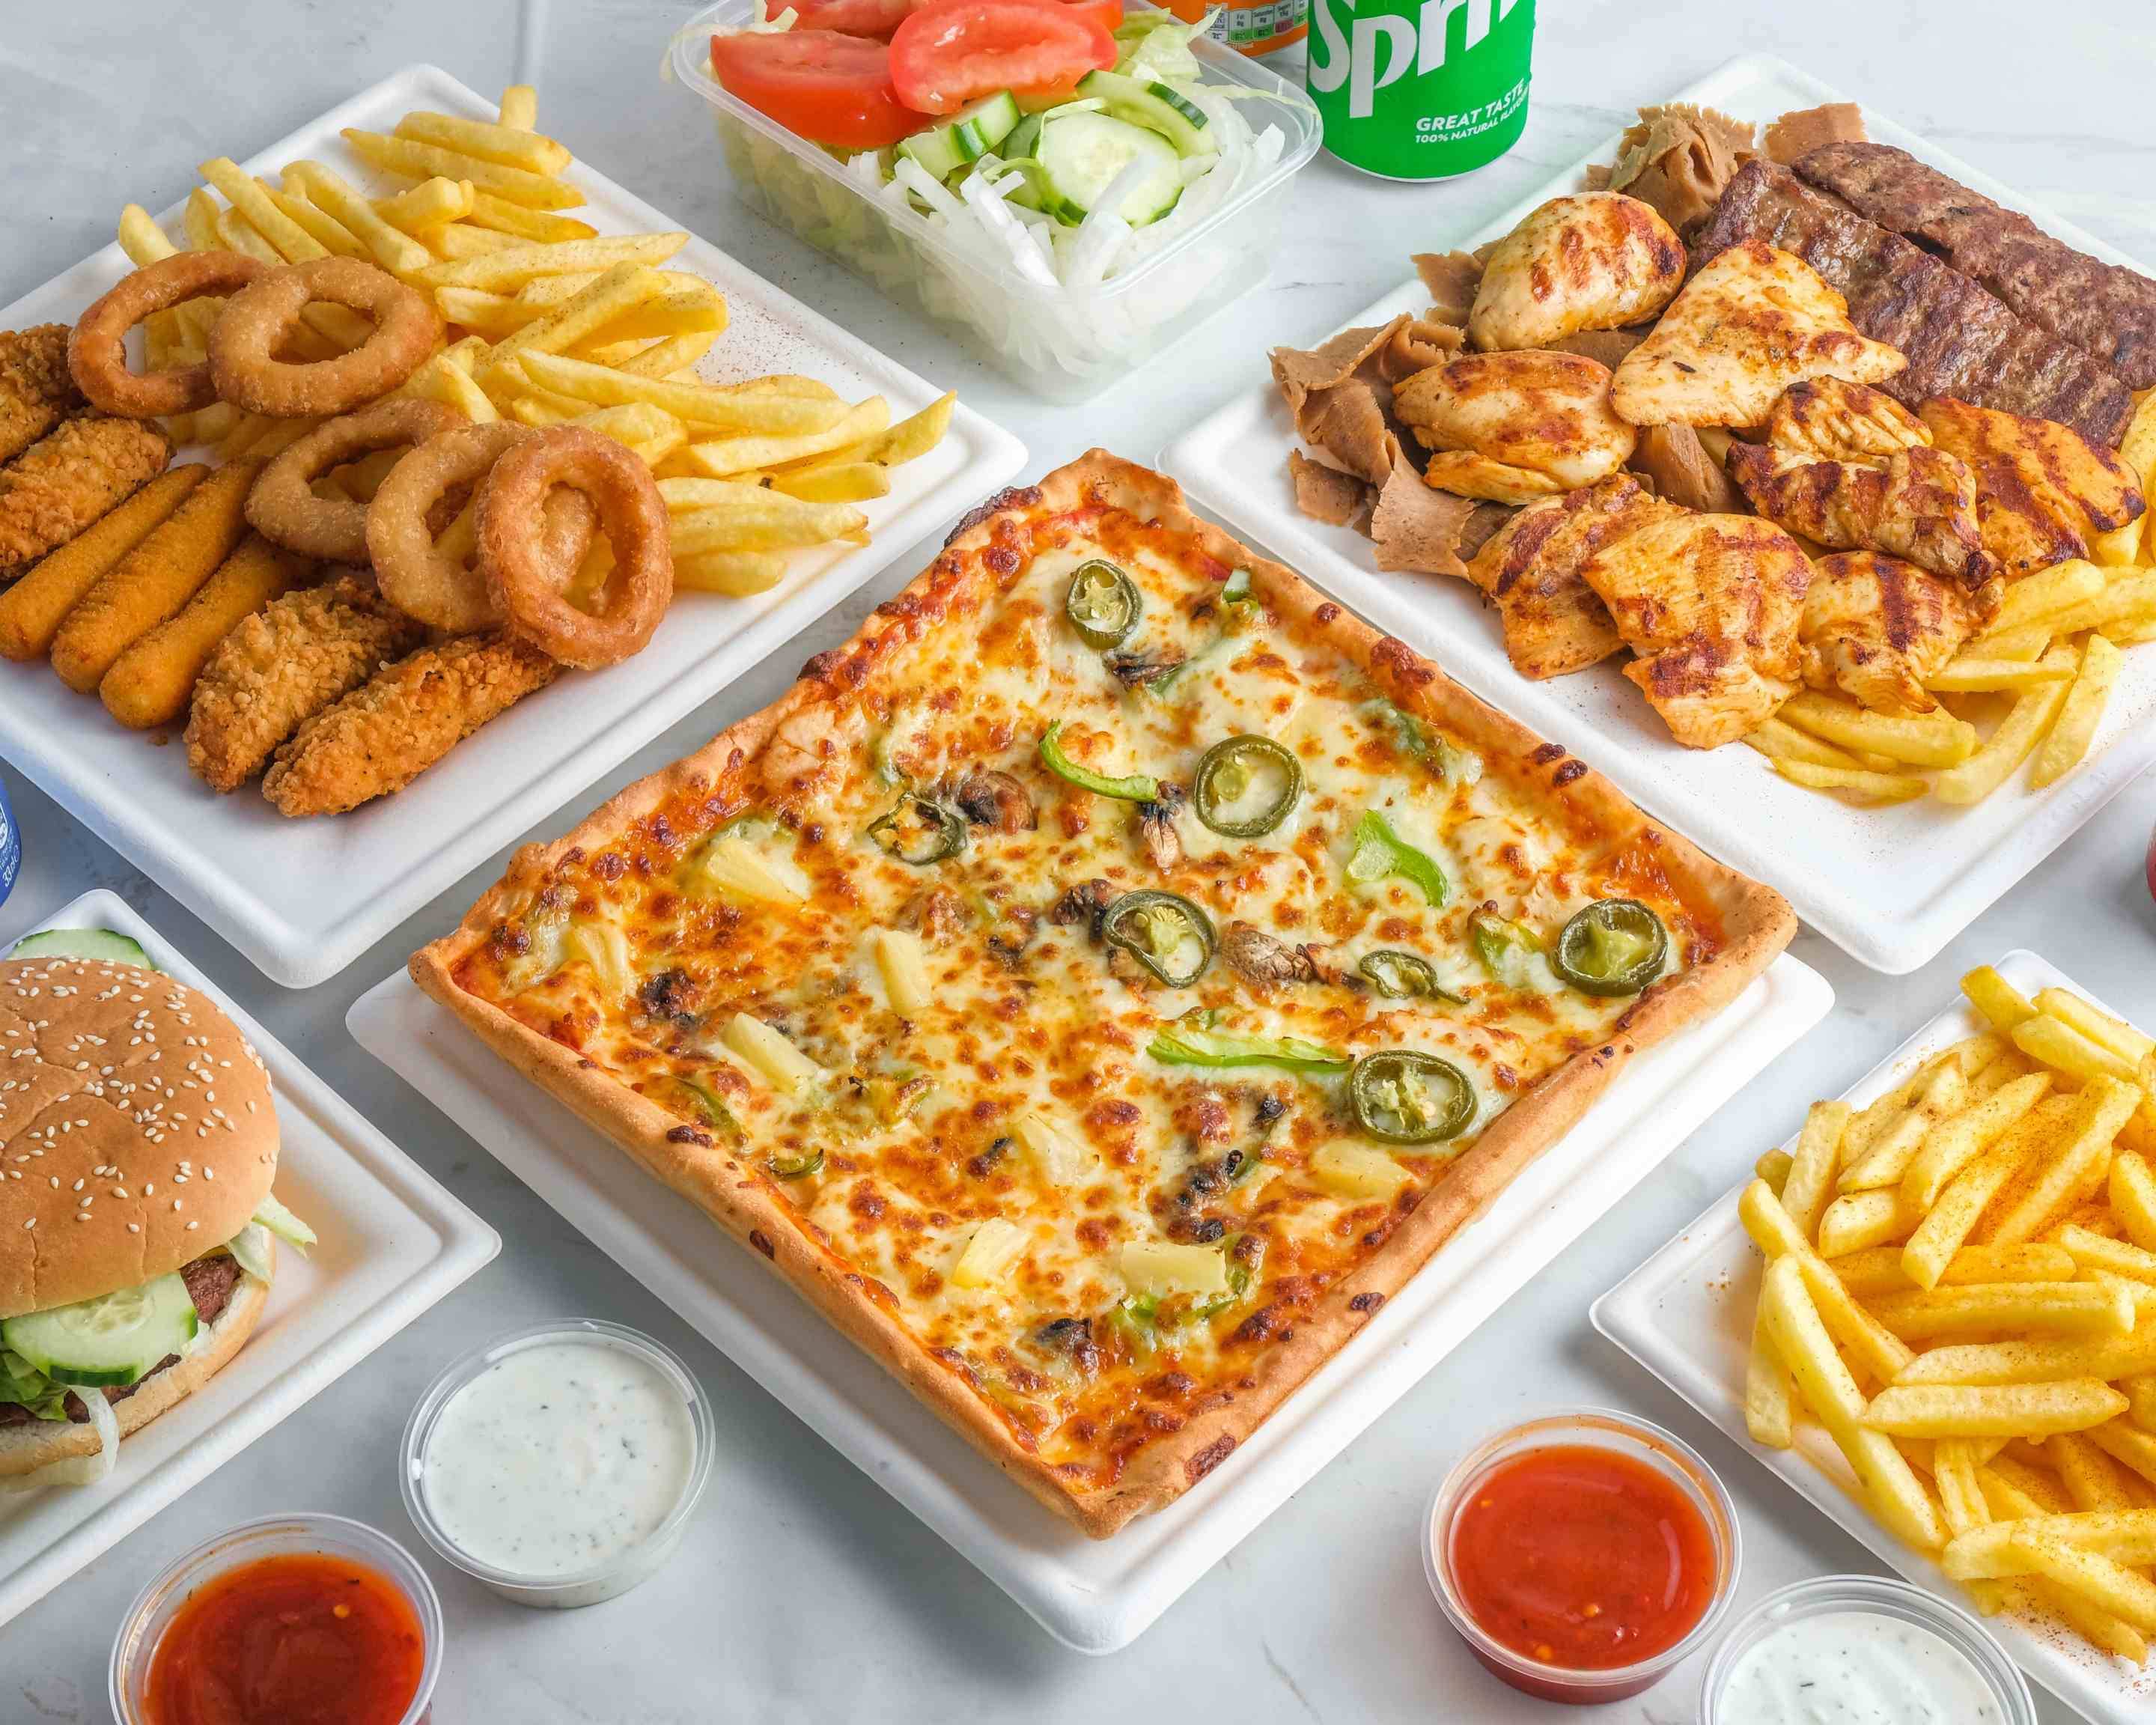 Pelican square pizza Menu - Takeaway in Kingston Upon Hull | Delivery menu  & prices | Uber Eats